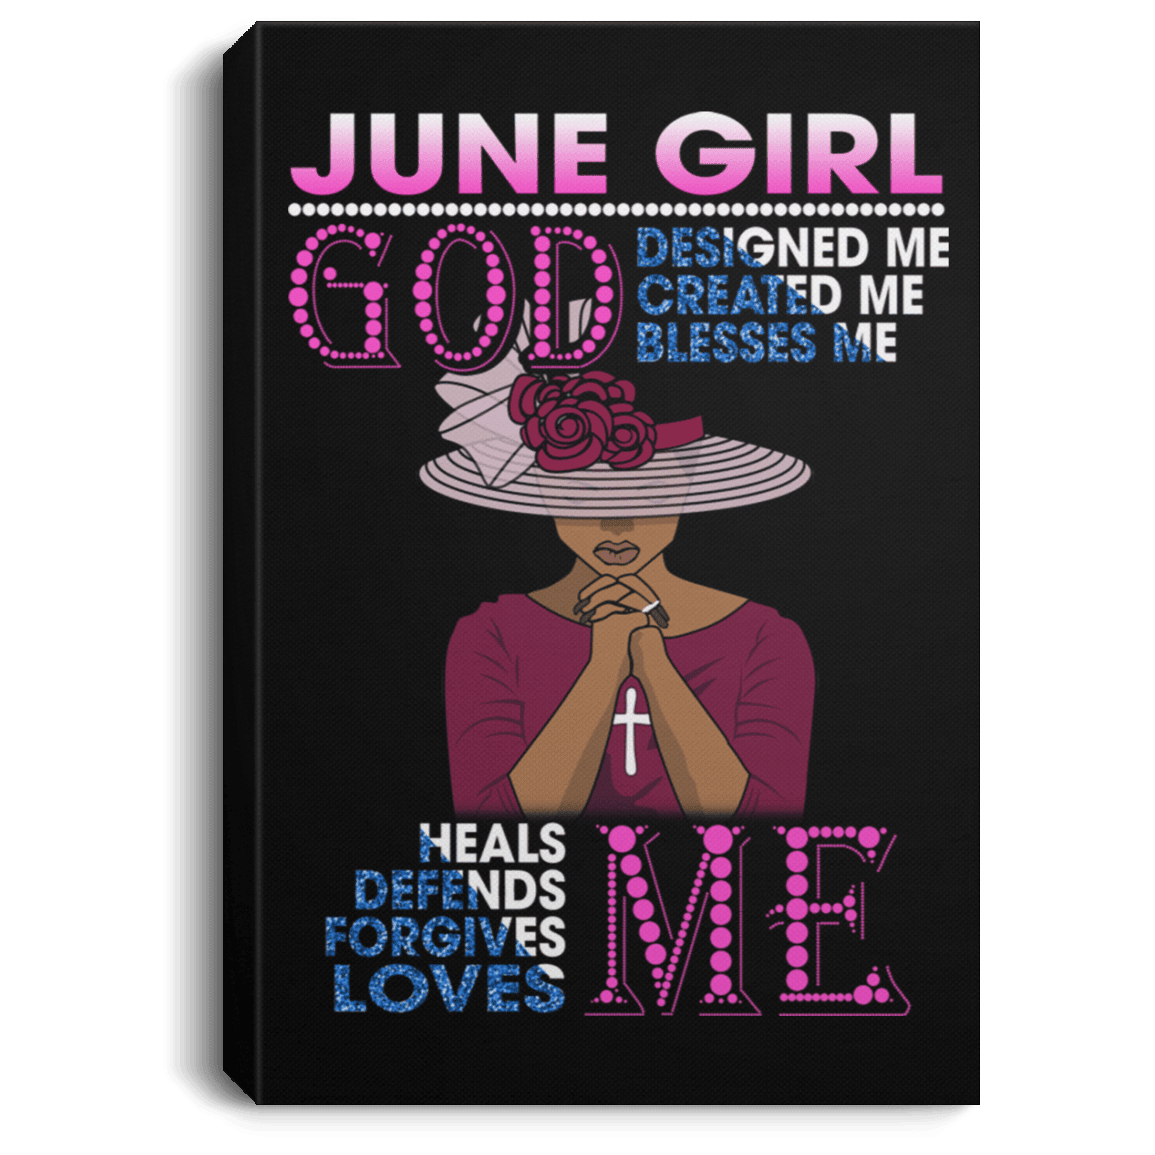 African American Canvas Wall Art June Girl God Designed Created Blesses Heals Defends Me Black History Canvas Art Living Room Decor